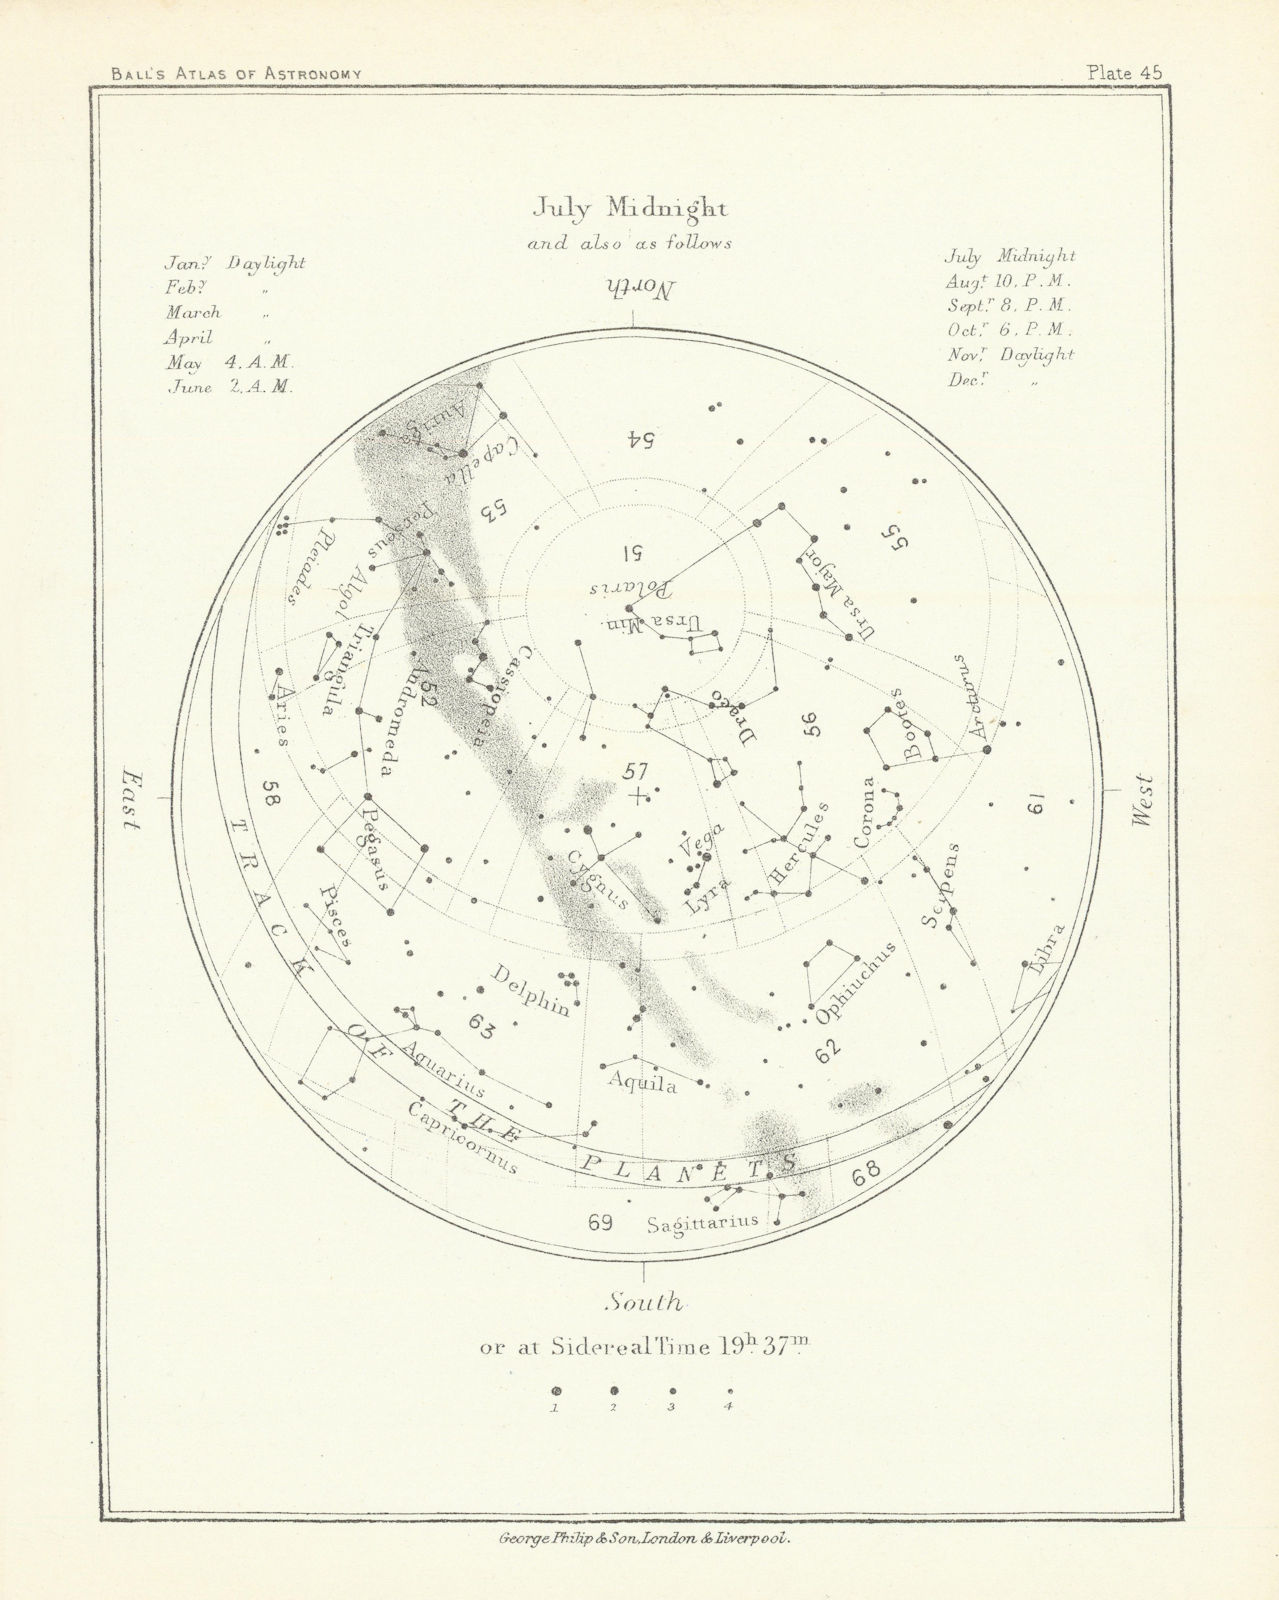 Night Sky Star Chart - July Midnight by Robert Ball. Astronomy 1892 old map